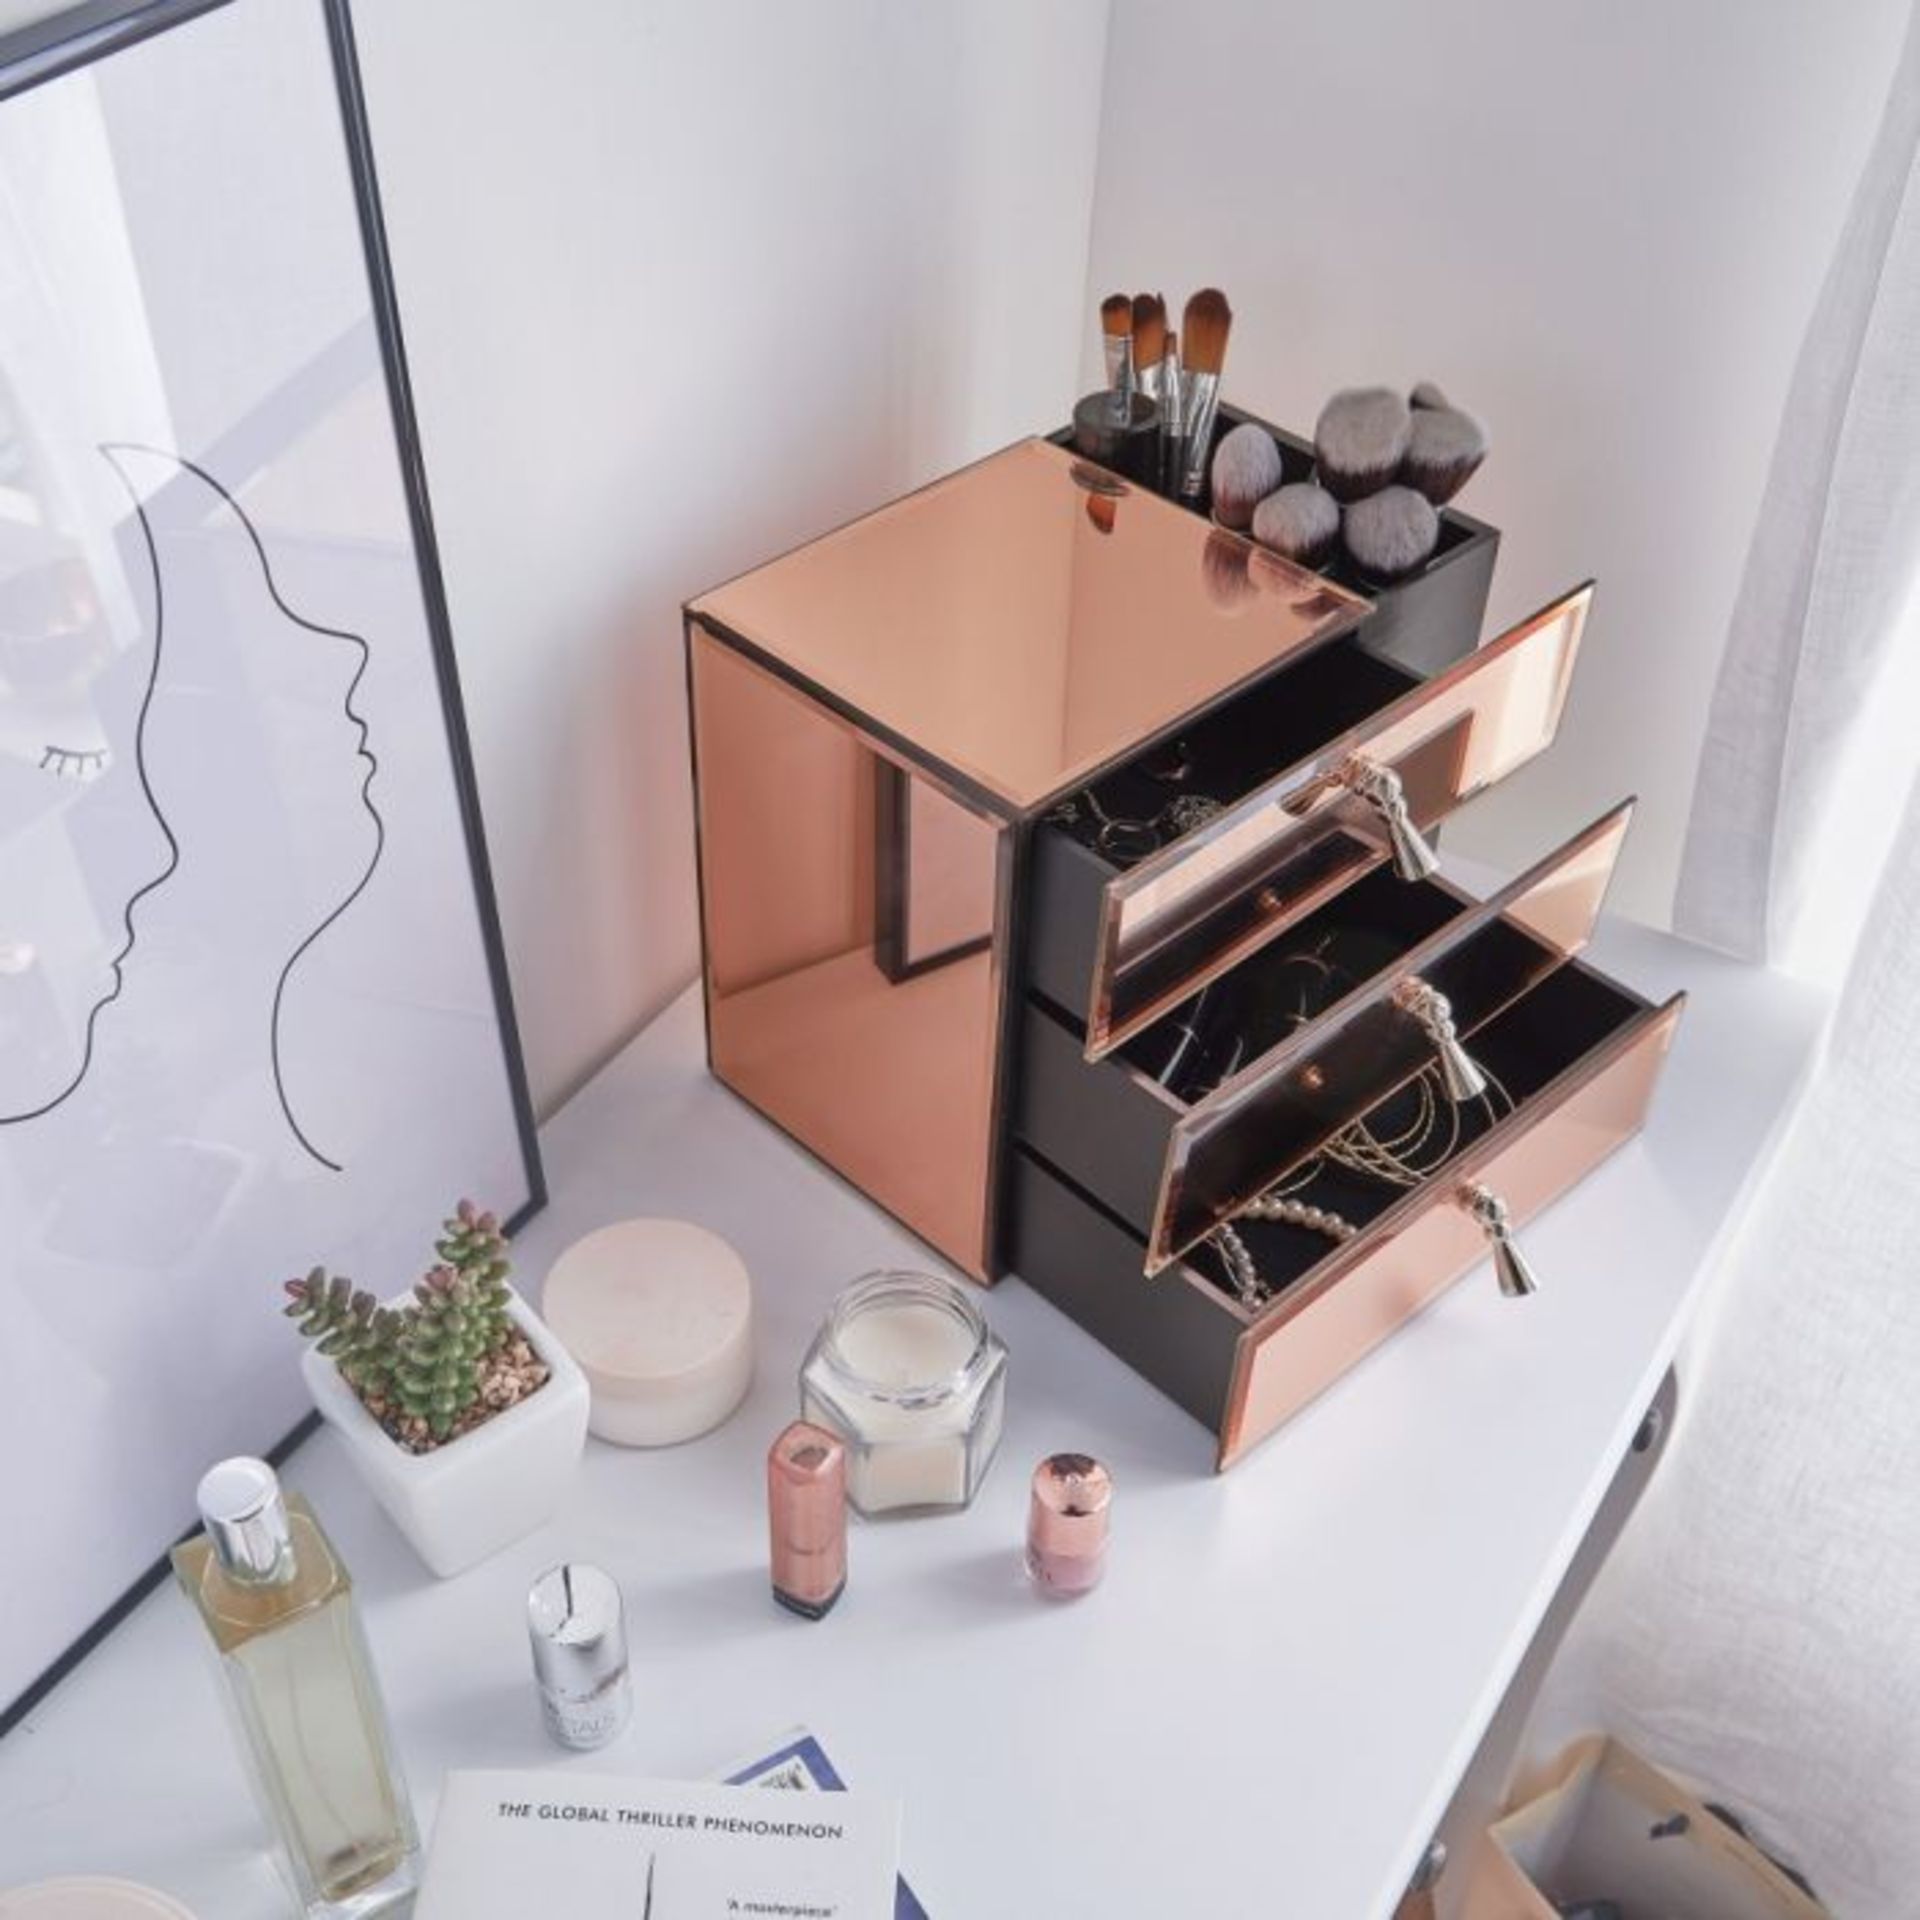 (V165) Rose Gold 3 Drawer Mirrored Jewellery Organiser. The perfect place to hide away clutter... - Image 3 of 4